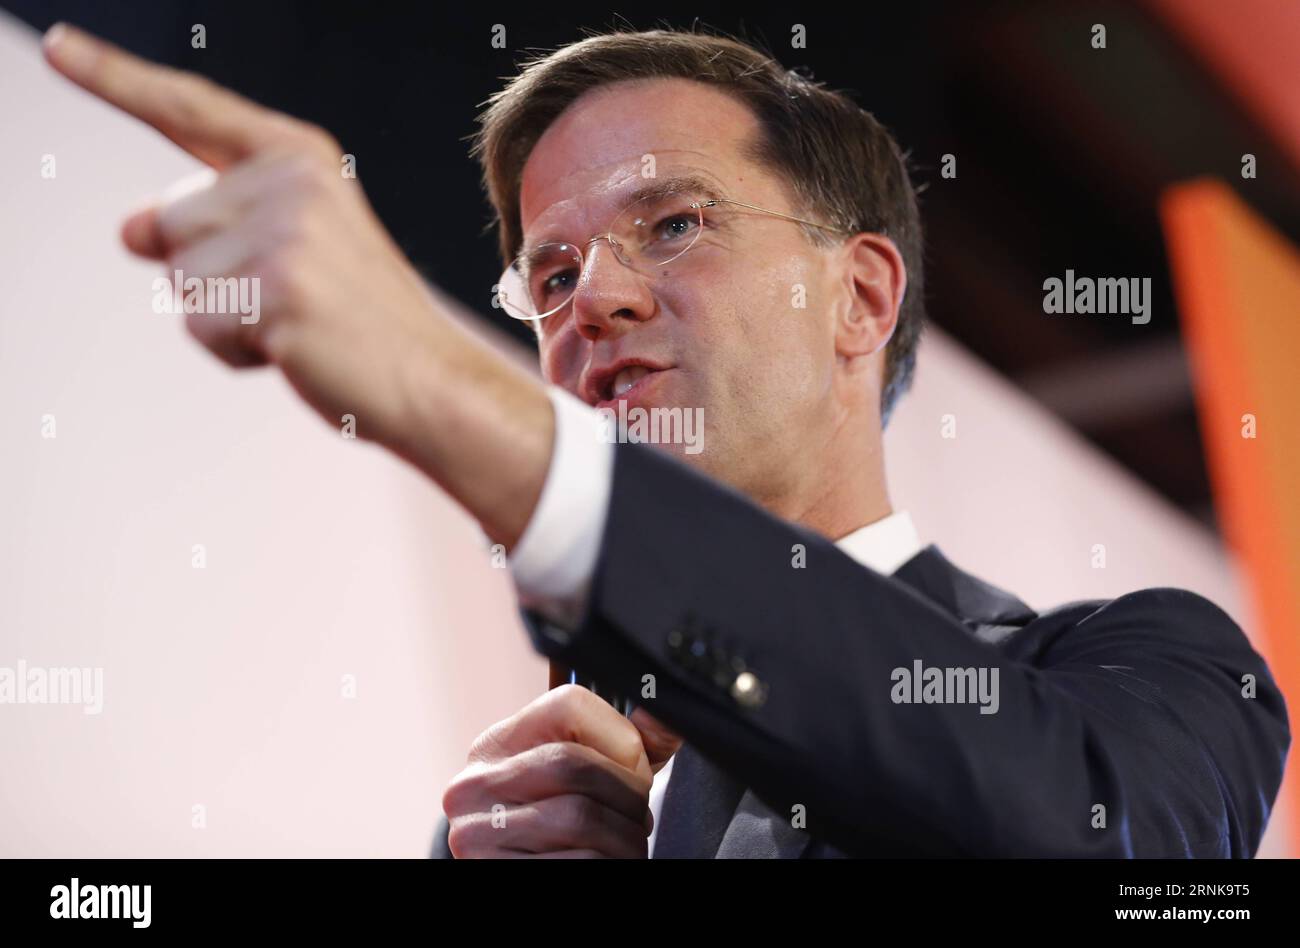 (170315) -- THE HAGUE, March 15, 2017 -- Dutch Prime Minister and People s Party for Freedom and Democracy VVD leader Mark Rutte speaks during election night for his liberal rightist party VVD in The Hague, the Netherlands, on March 15, 2017. The liberal rightist party VVD of Prime Minister Mark Rutte took the lead in the Dutch parliamentary elections, according to the final exit poll released on Wednesday, with the far-right party PVV staying far behind. ) THE NETHERLANDS-THE HAGUE-PARLIAMENTARY ELECTIONS-EXIT POLL-VVD-LEADING-MARK RUTTE YexPingfan PUBLICATIONxNOTxINxCHN   The Hague March 15 Stock Photo